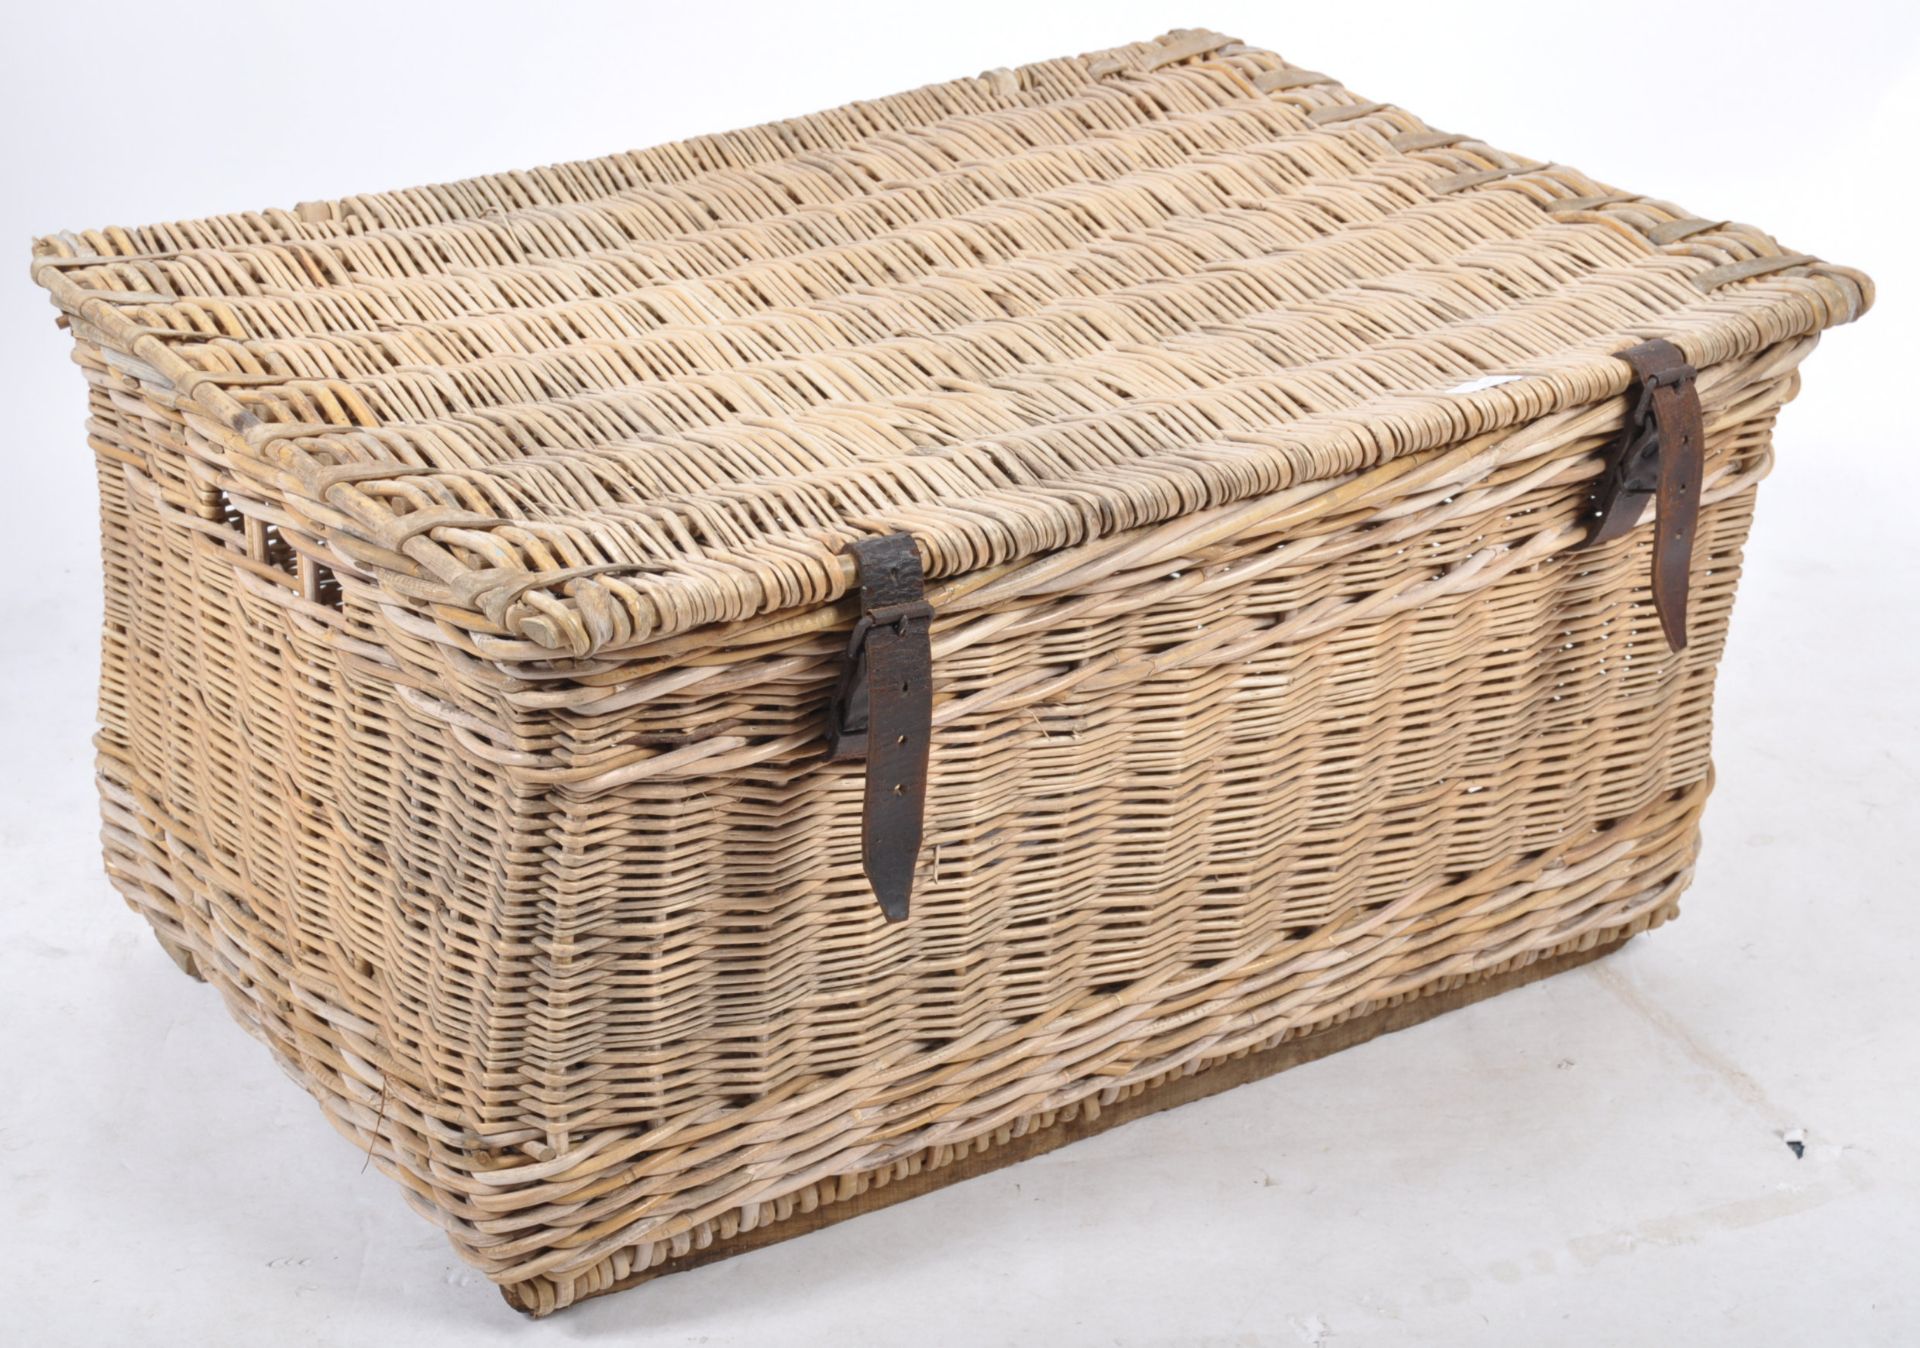 LARGE EARLY 20TH CENTURY WICKER LAUNDRY BASKET CHEST - Image 2 of 4